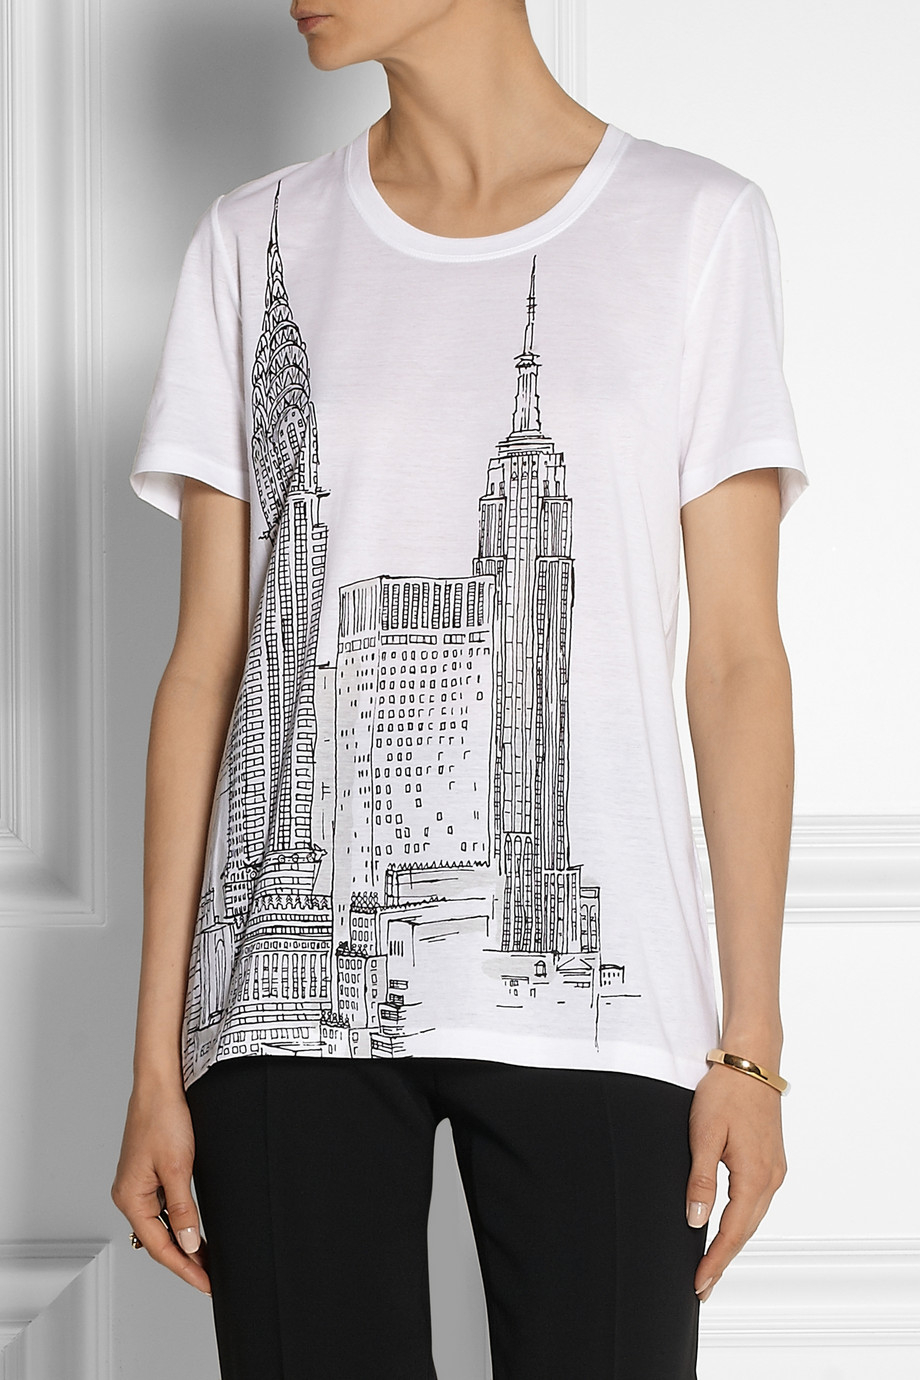 Lyst - Burberry prorsum New York City Printed Cottonjersey Tshirt in White